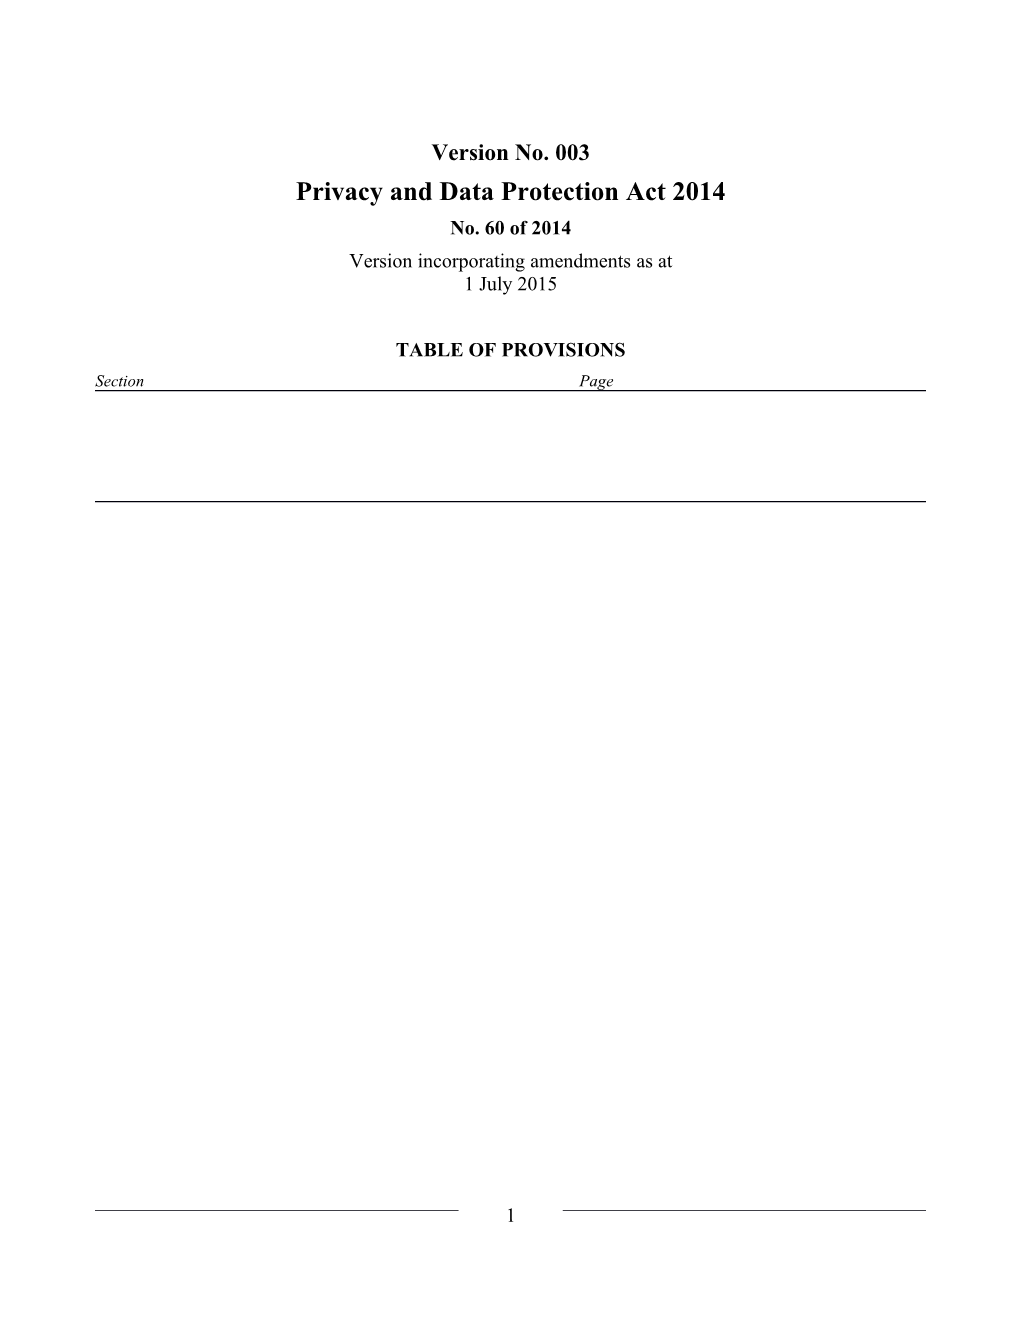 Privacy and Data Protection Act 2014